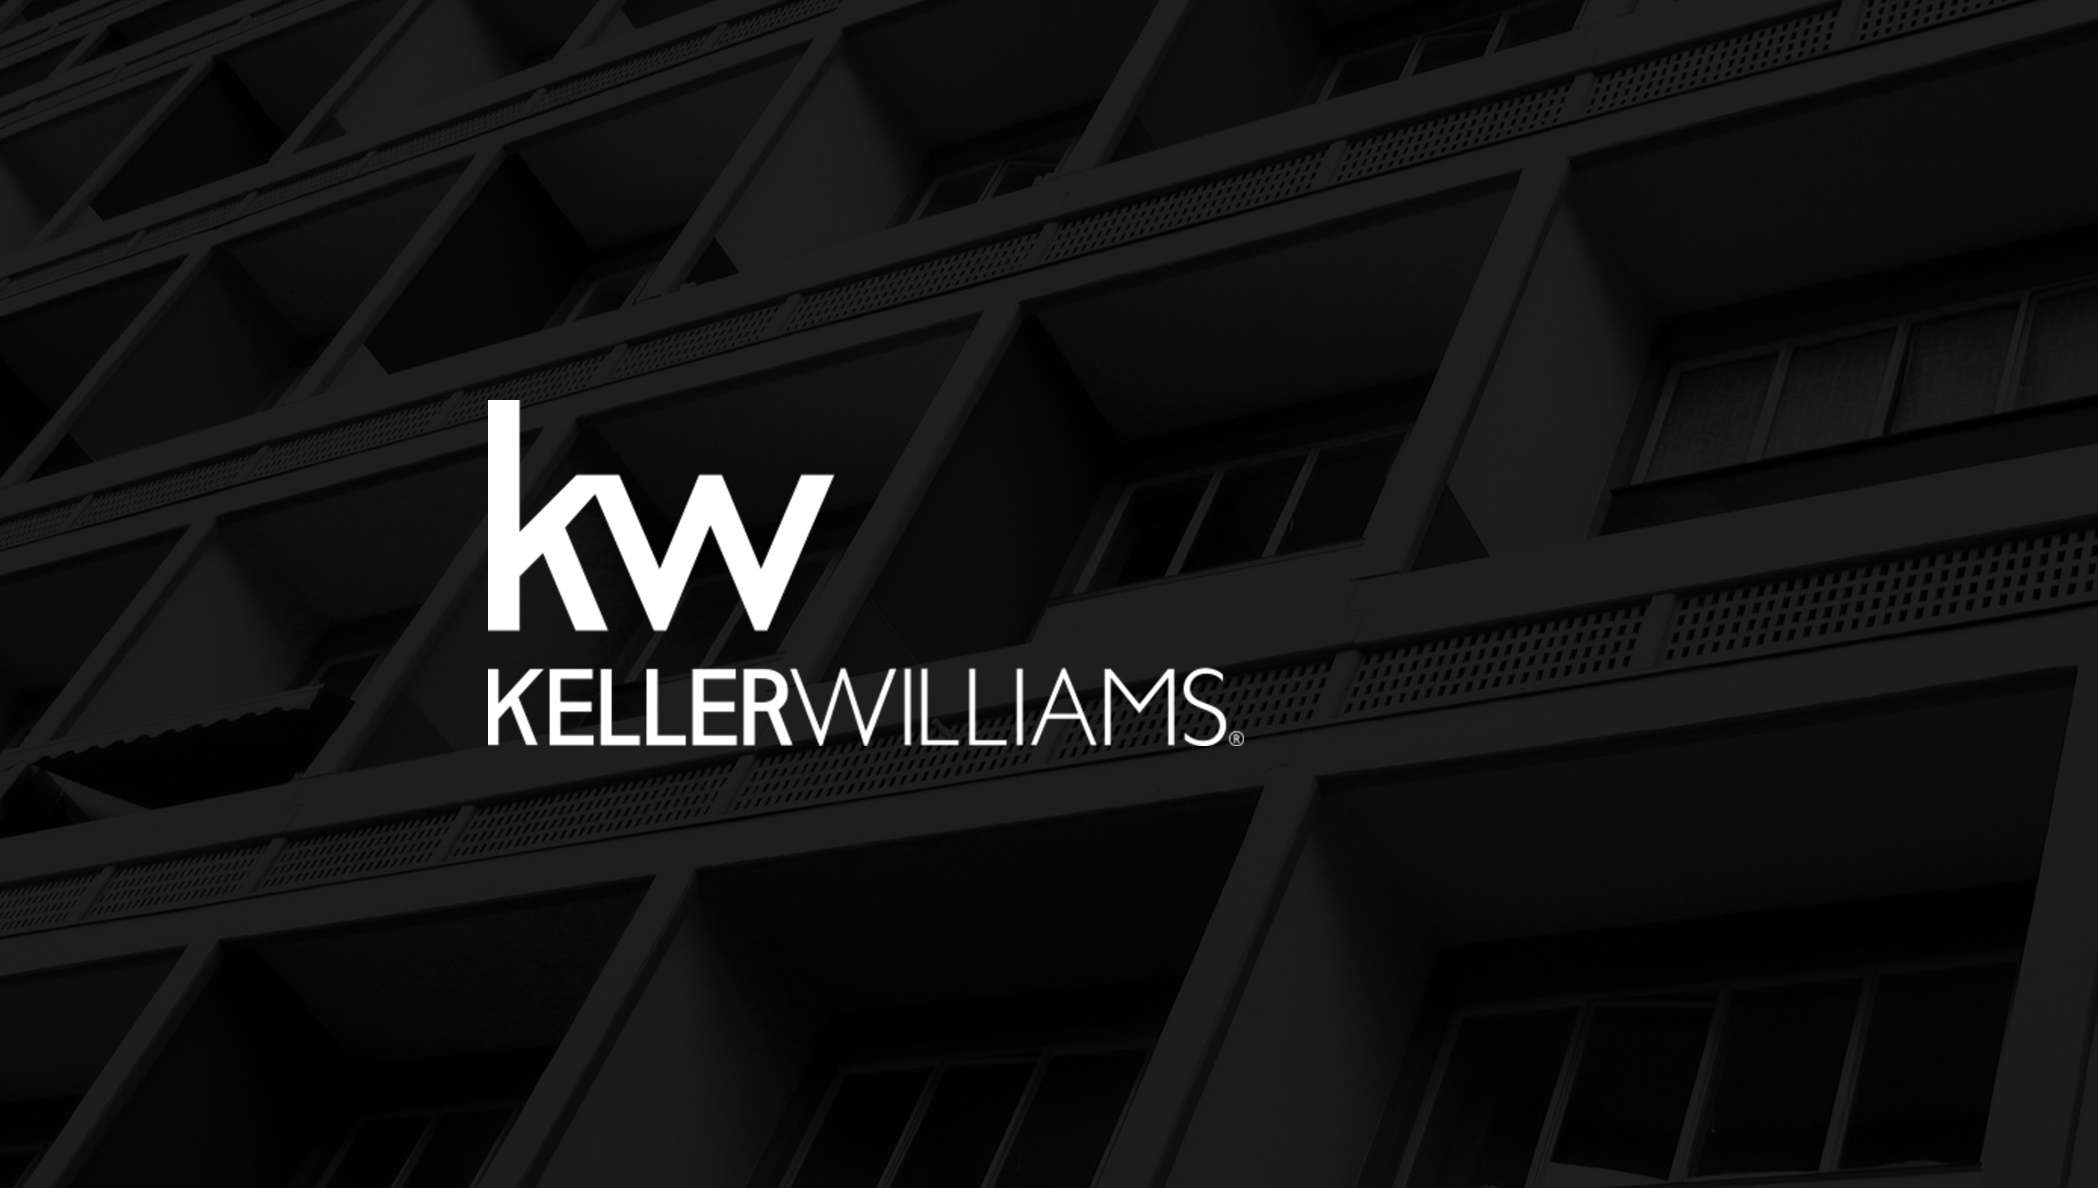 DocuSign customer Keller Williams uses Rooms for Real Estate.